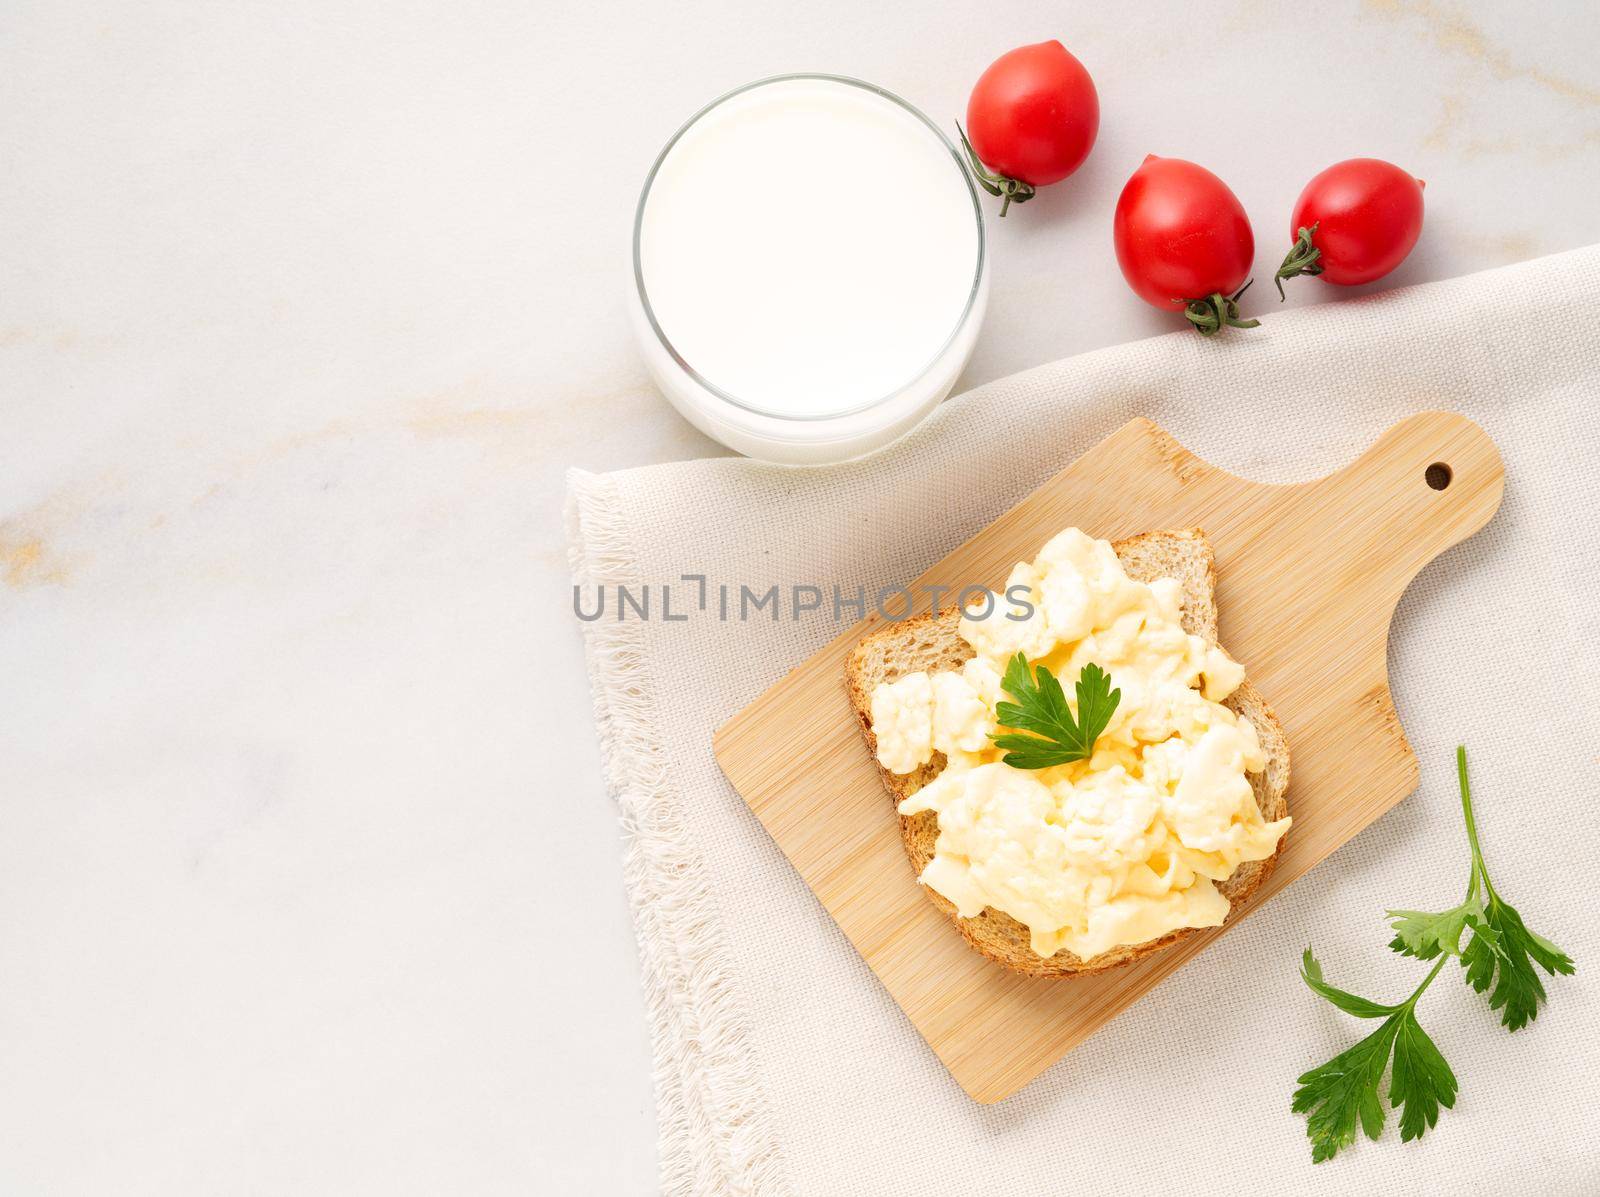 Sandwich with pan-fried scrambled eggs on a wooden cutting board, top view, copy space